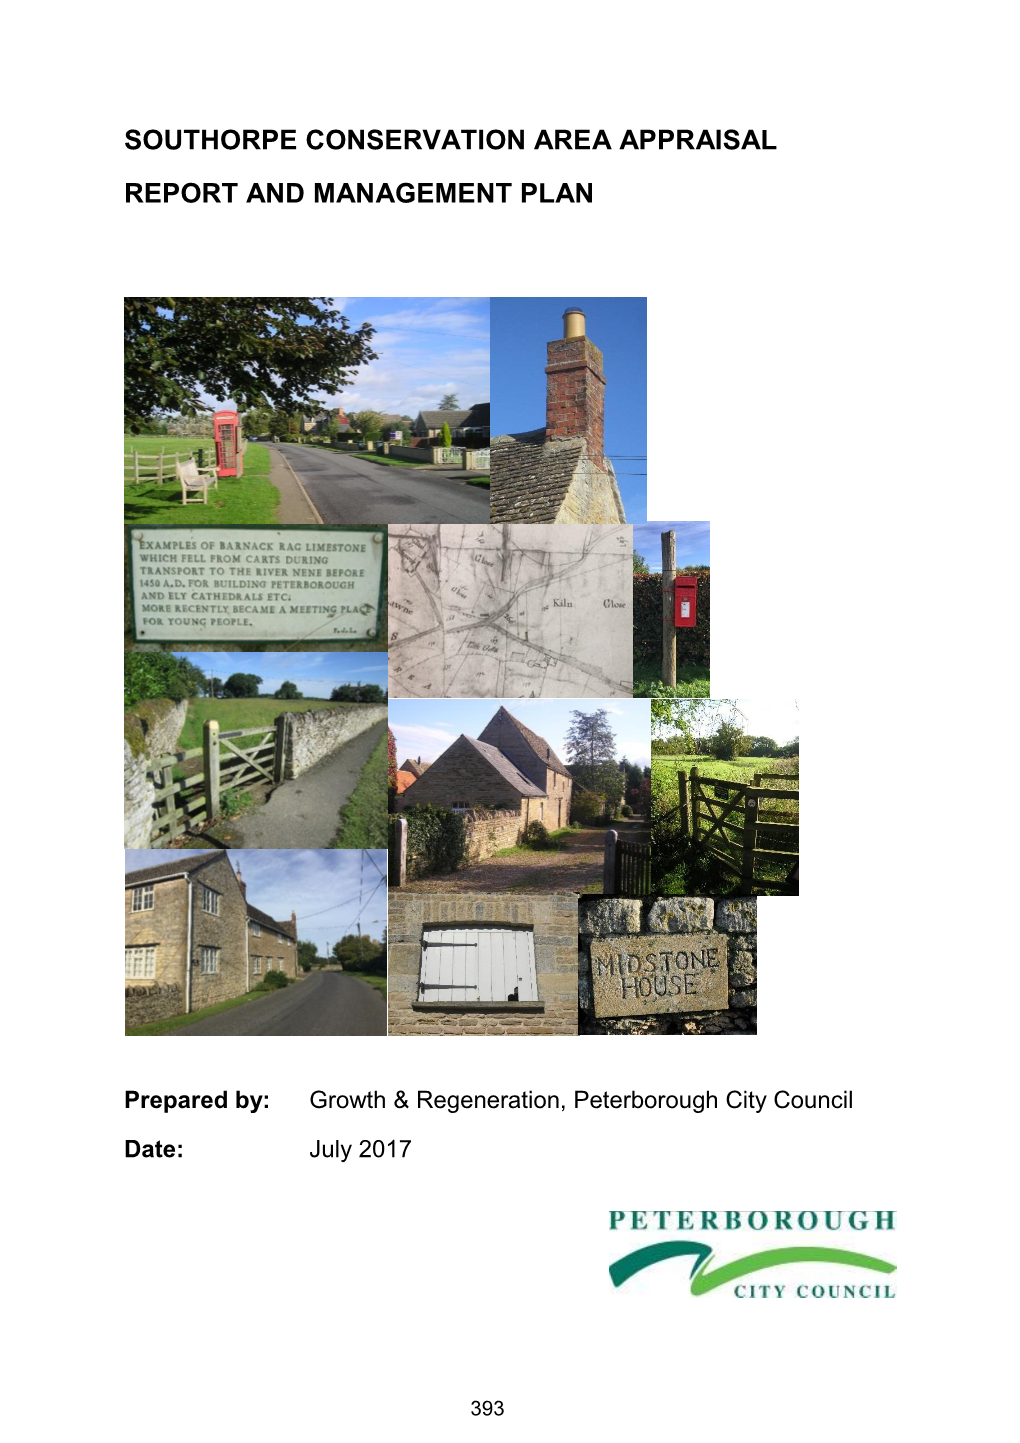 Southorpe Conservation Area Appraisal Report and Management Plan